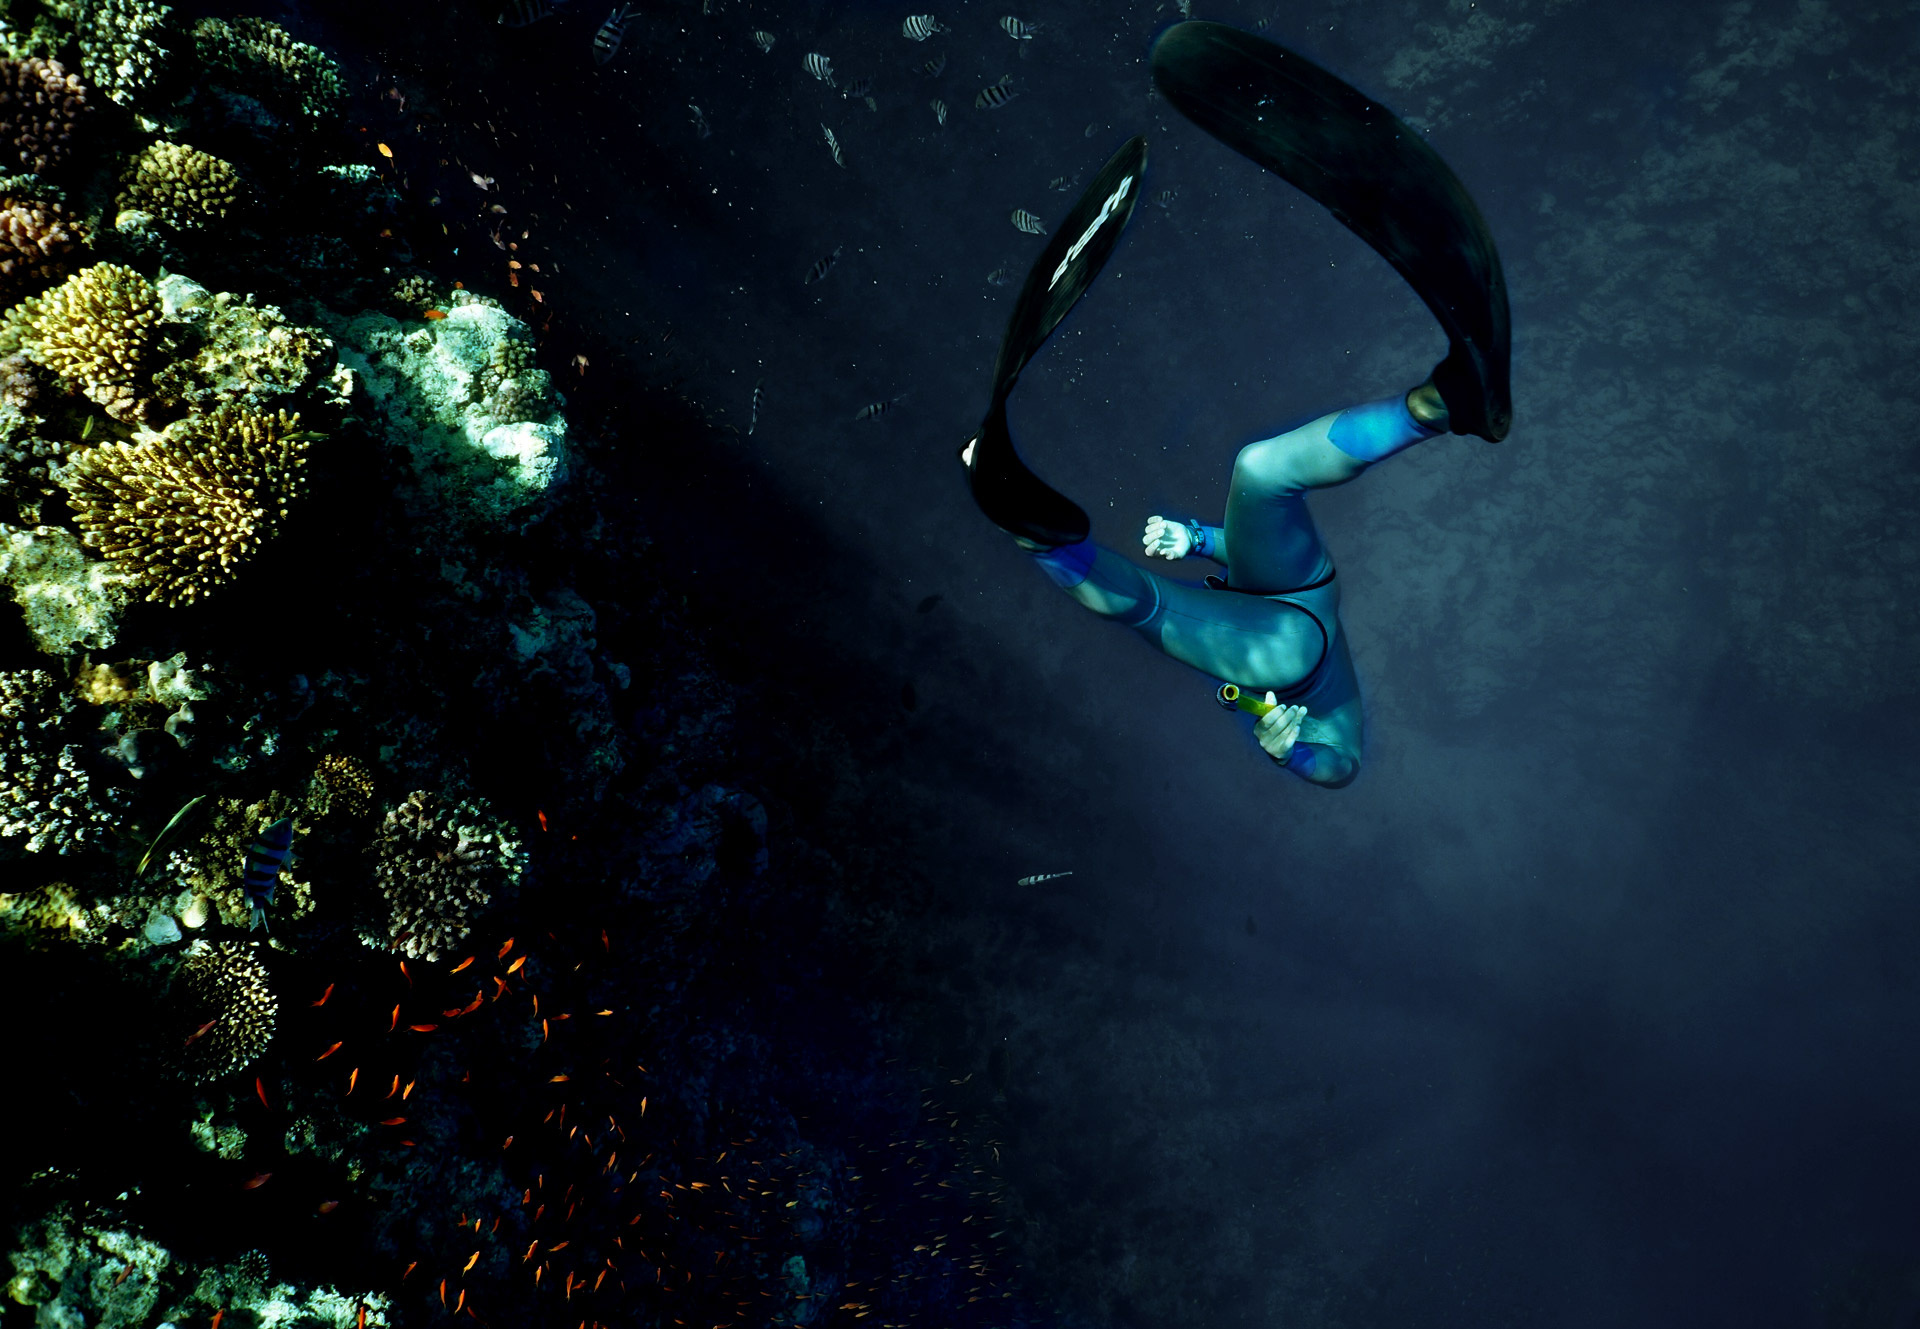 Freediving: Diving into the flooded cave without an oxygen reserve, A water sport of a high risk. 1920x1330 HD Wallpaper.